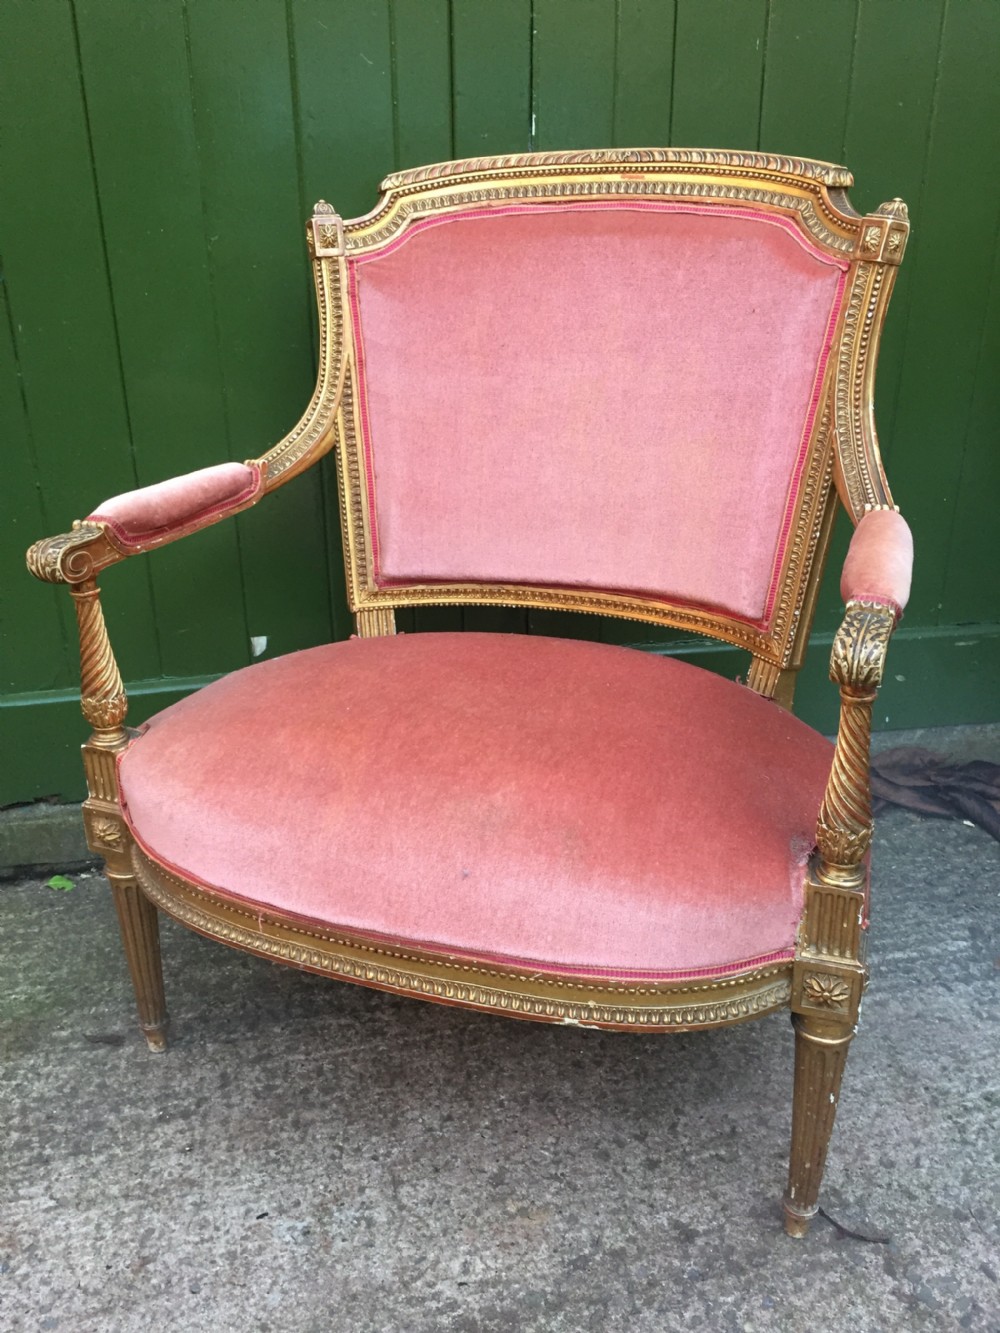 late c19th french giltwood salon chair of broad proportions in the louis xvi period style